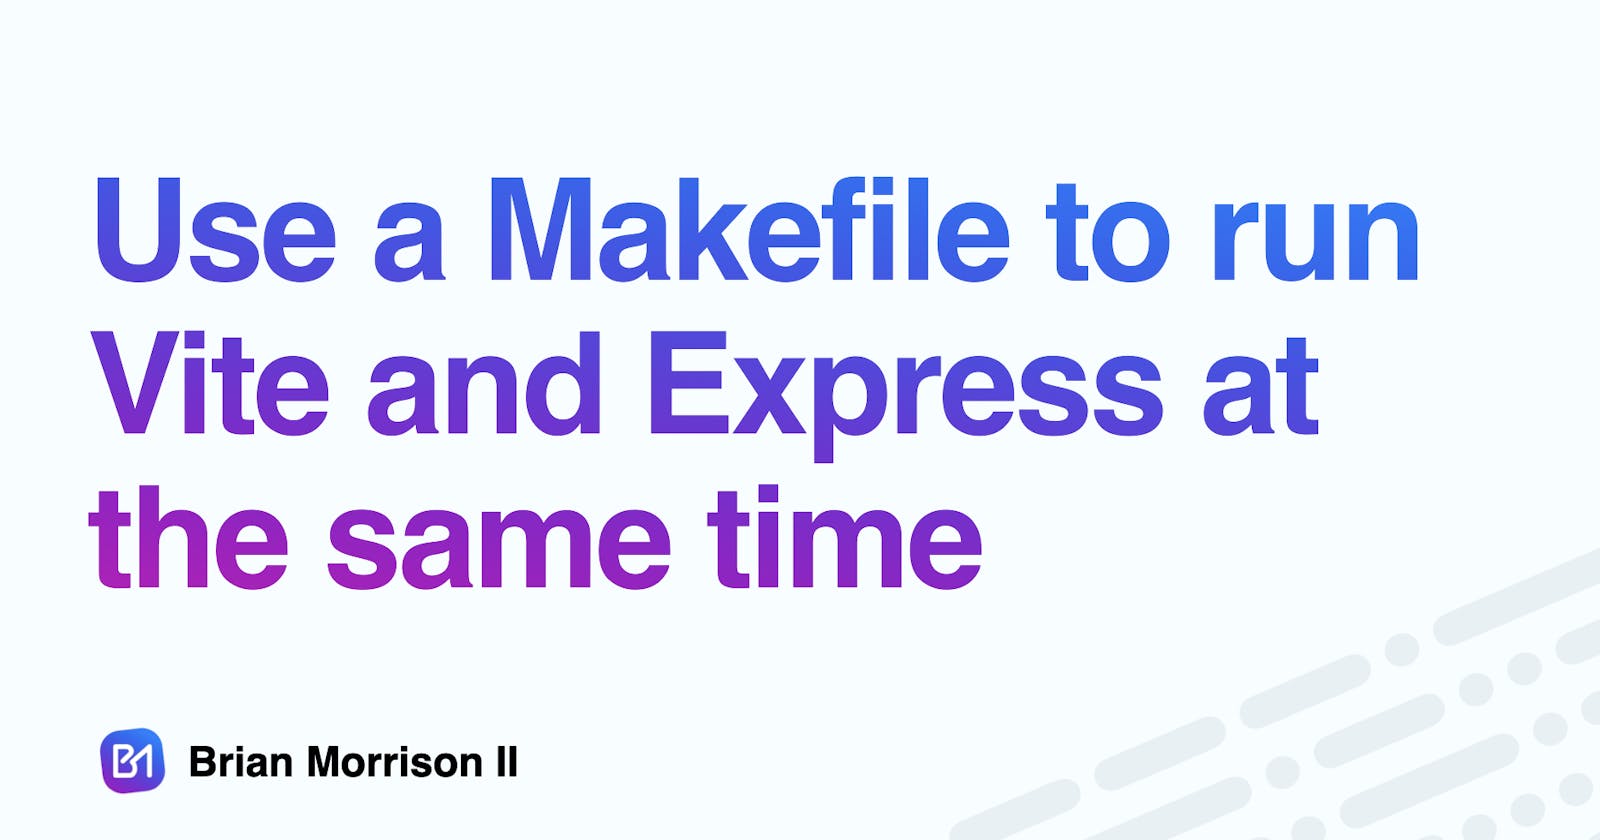 Use a Makefile to run Vite and Express at the same time